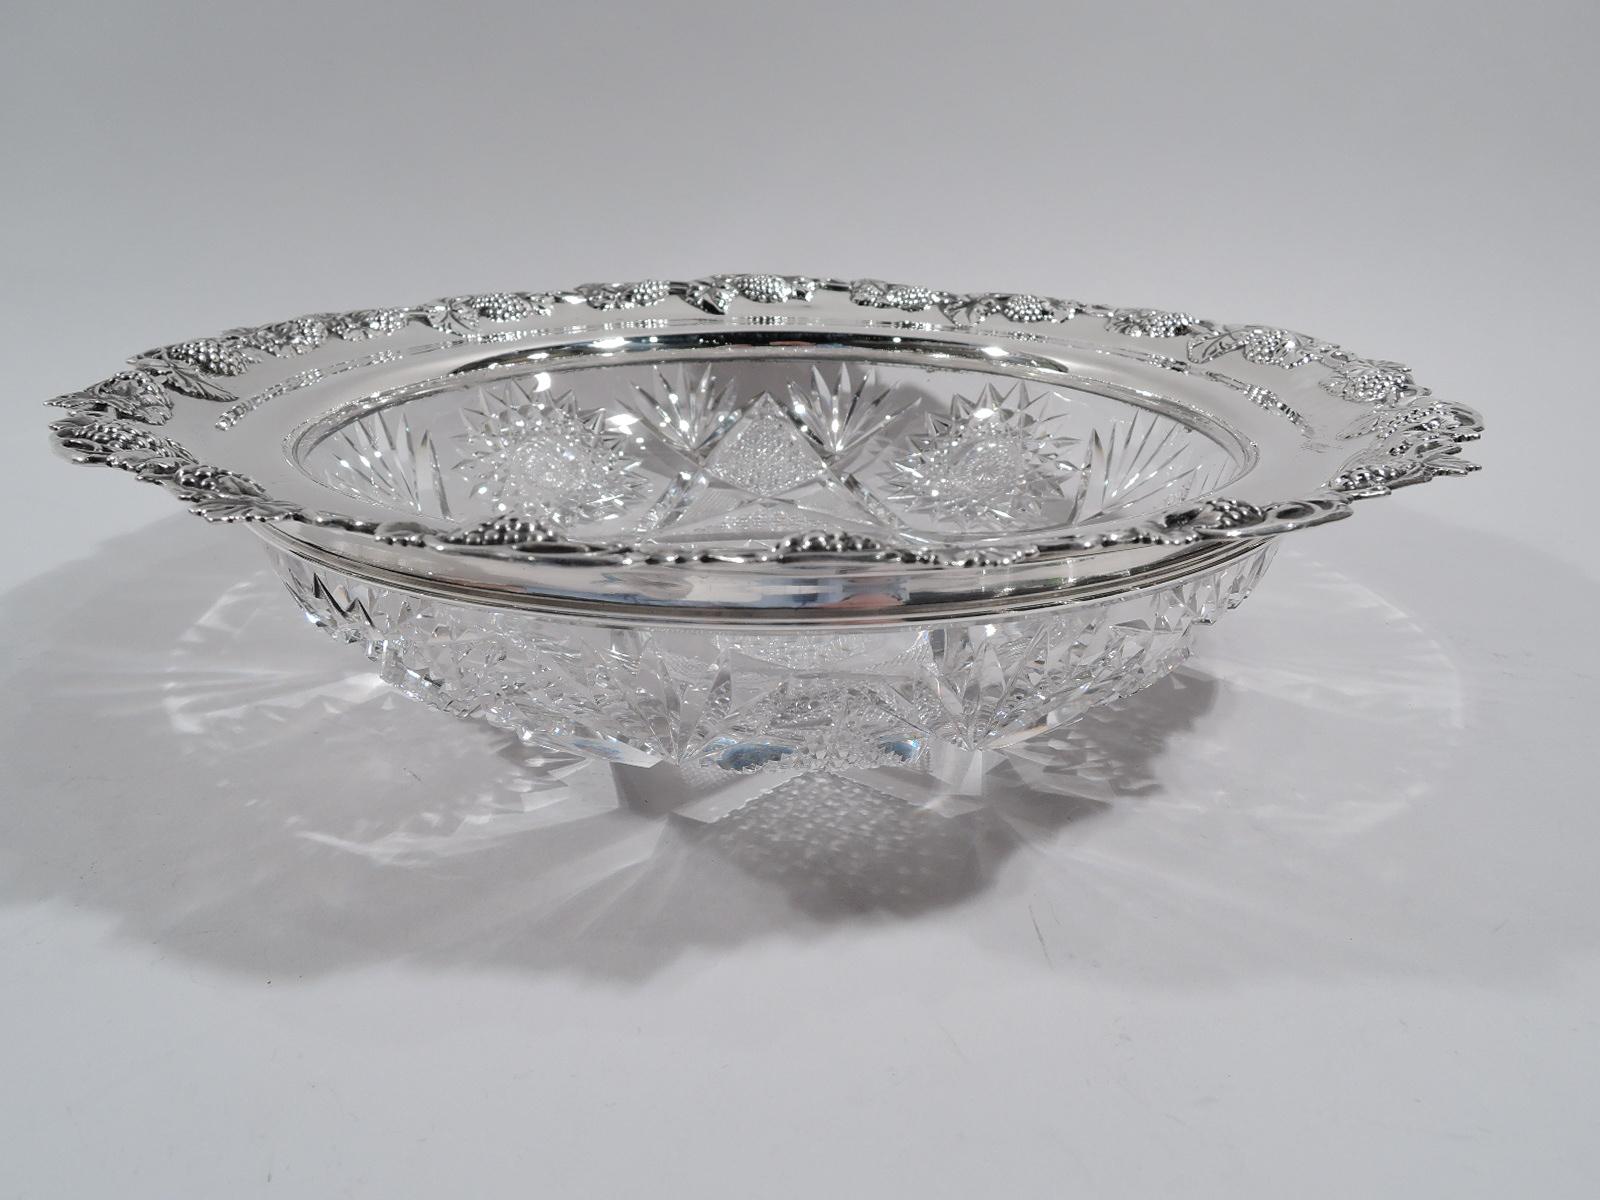 Edwardian Pair of American Brilliant-Cut Glass and Sterling Silver Berry Bowls